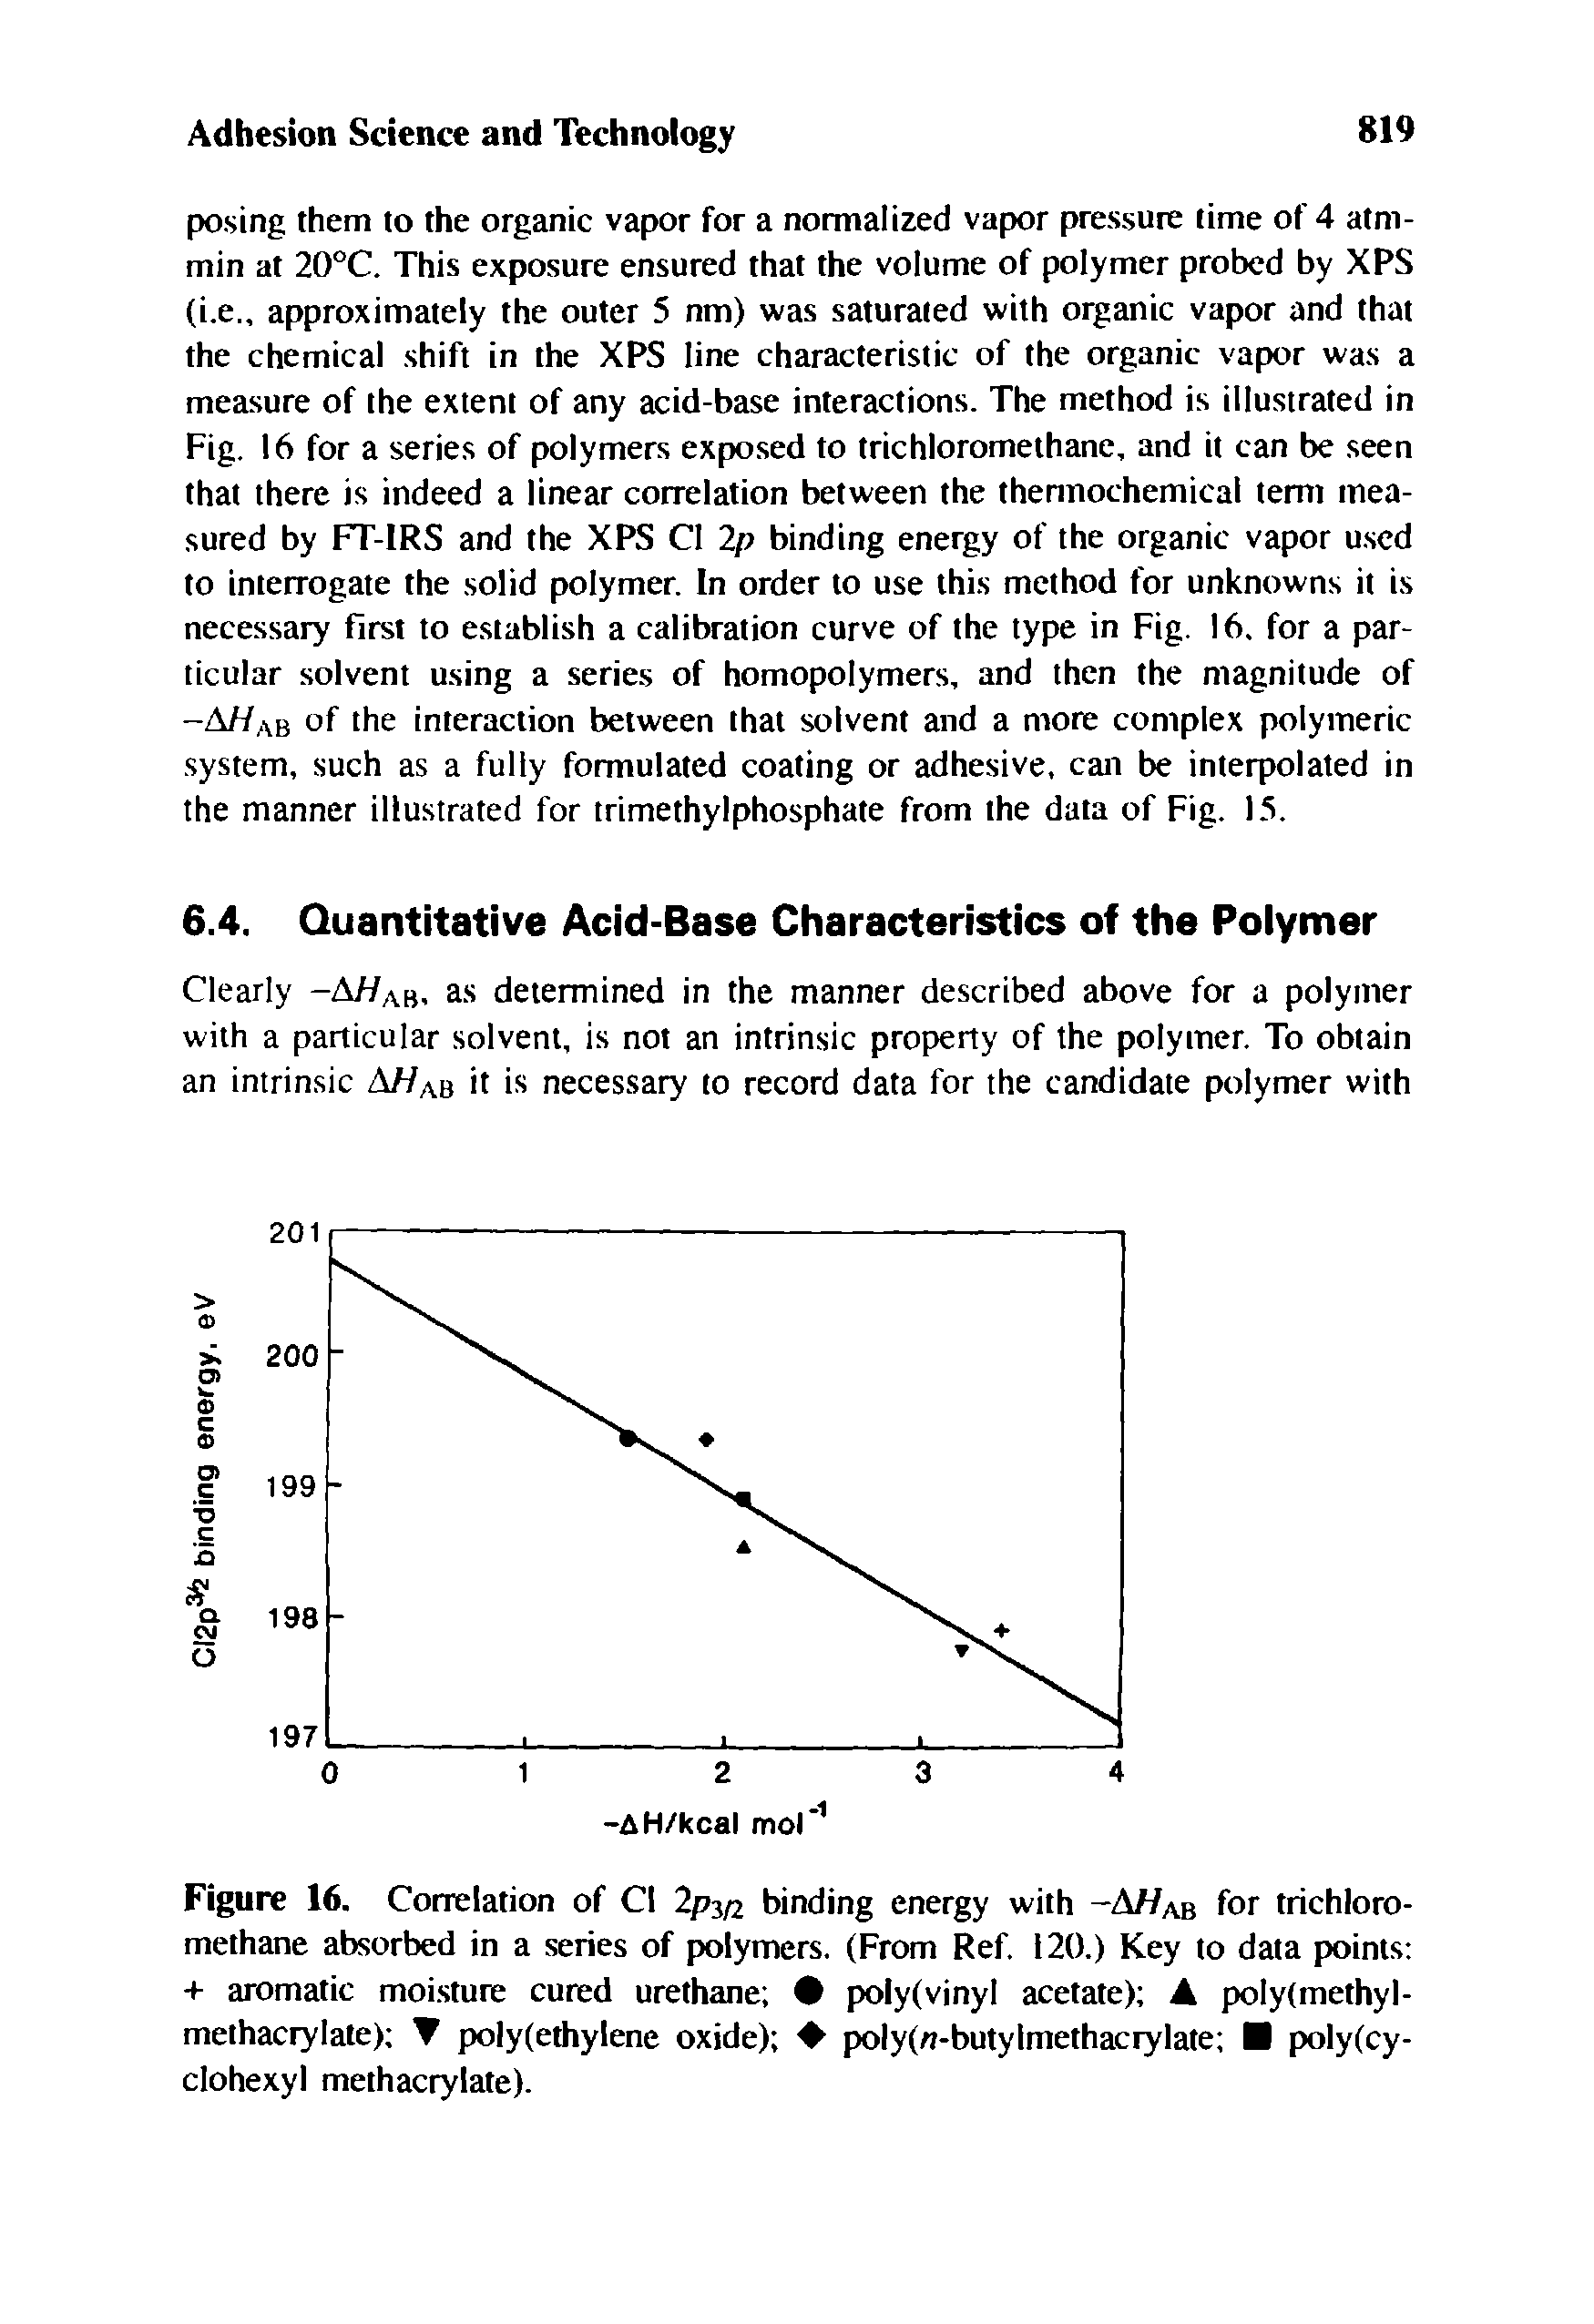 Figure 16. Correlation of Cl 2pj/2 binding energy with -A//ab for trichloro-methane absorbed in a series of polymers. (From Ref. 120.) Key to data points + aromatic moi.sture cured urethane poly(vinyl acetate) A poly(methyl-methaciylate) T poly(ethylene oxide) poly( -butylmethacrylate poly(cy-clohexyl methacrylate).